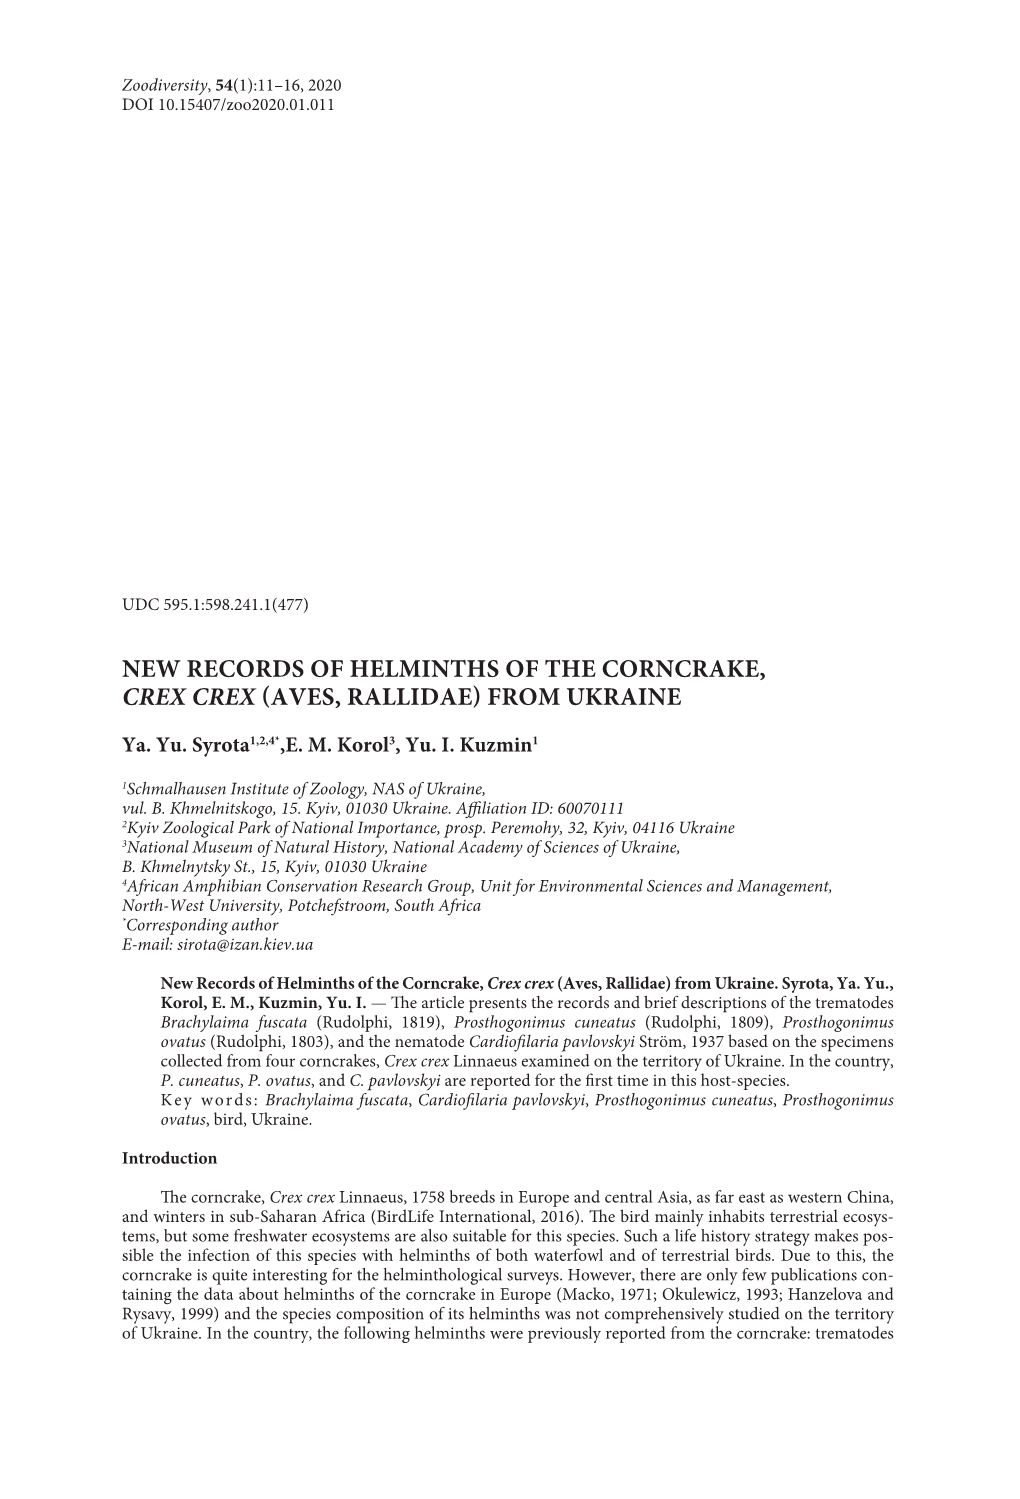 New Records of Helminths of the Corncrake, Crex Crex (Aves, Rallidae) from Ukraine